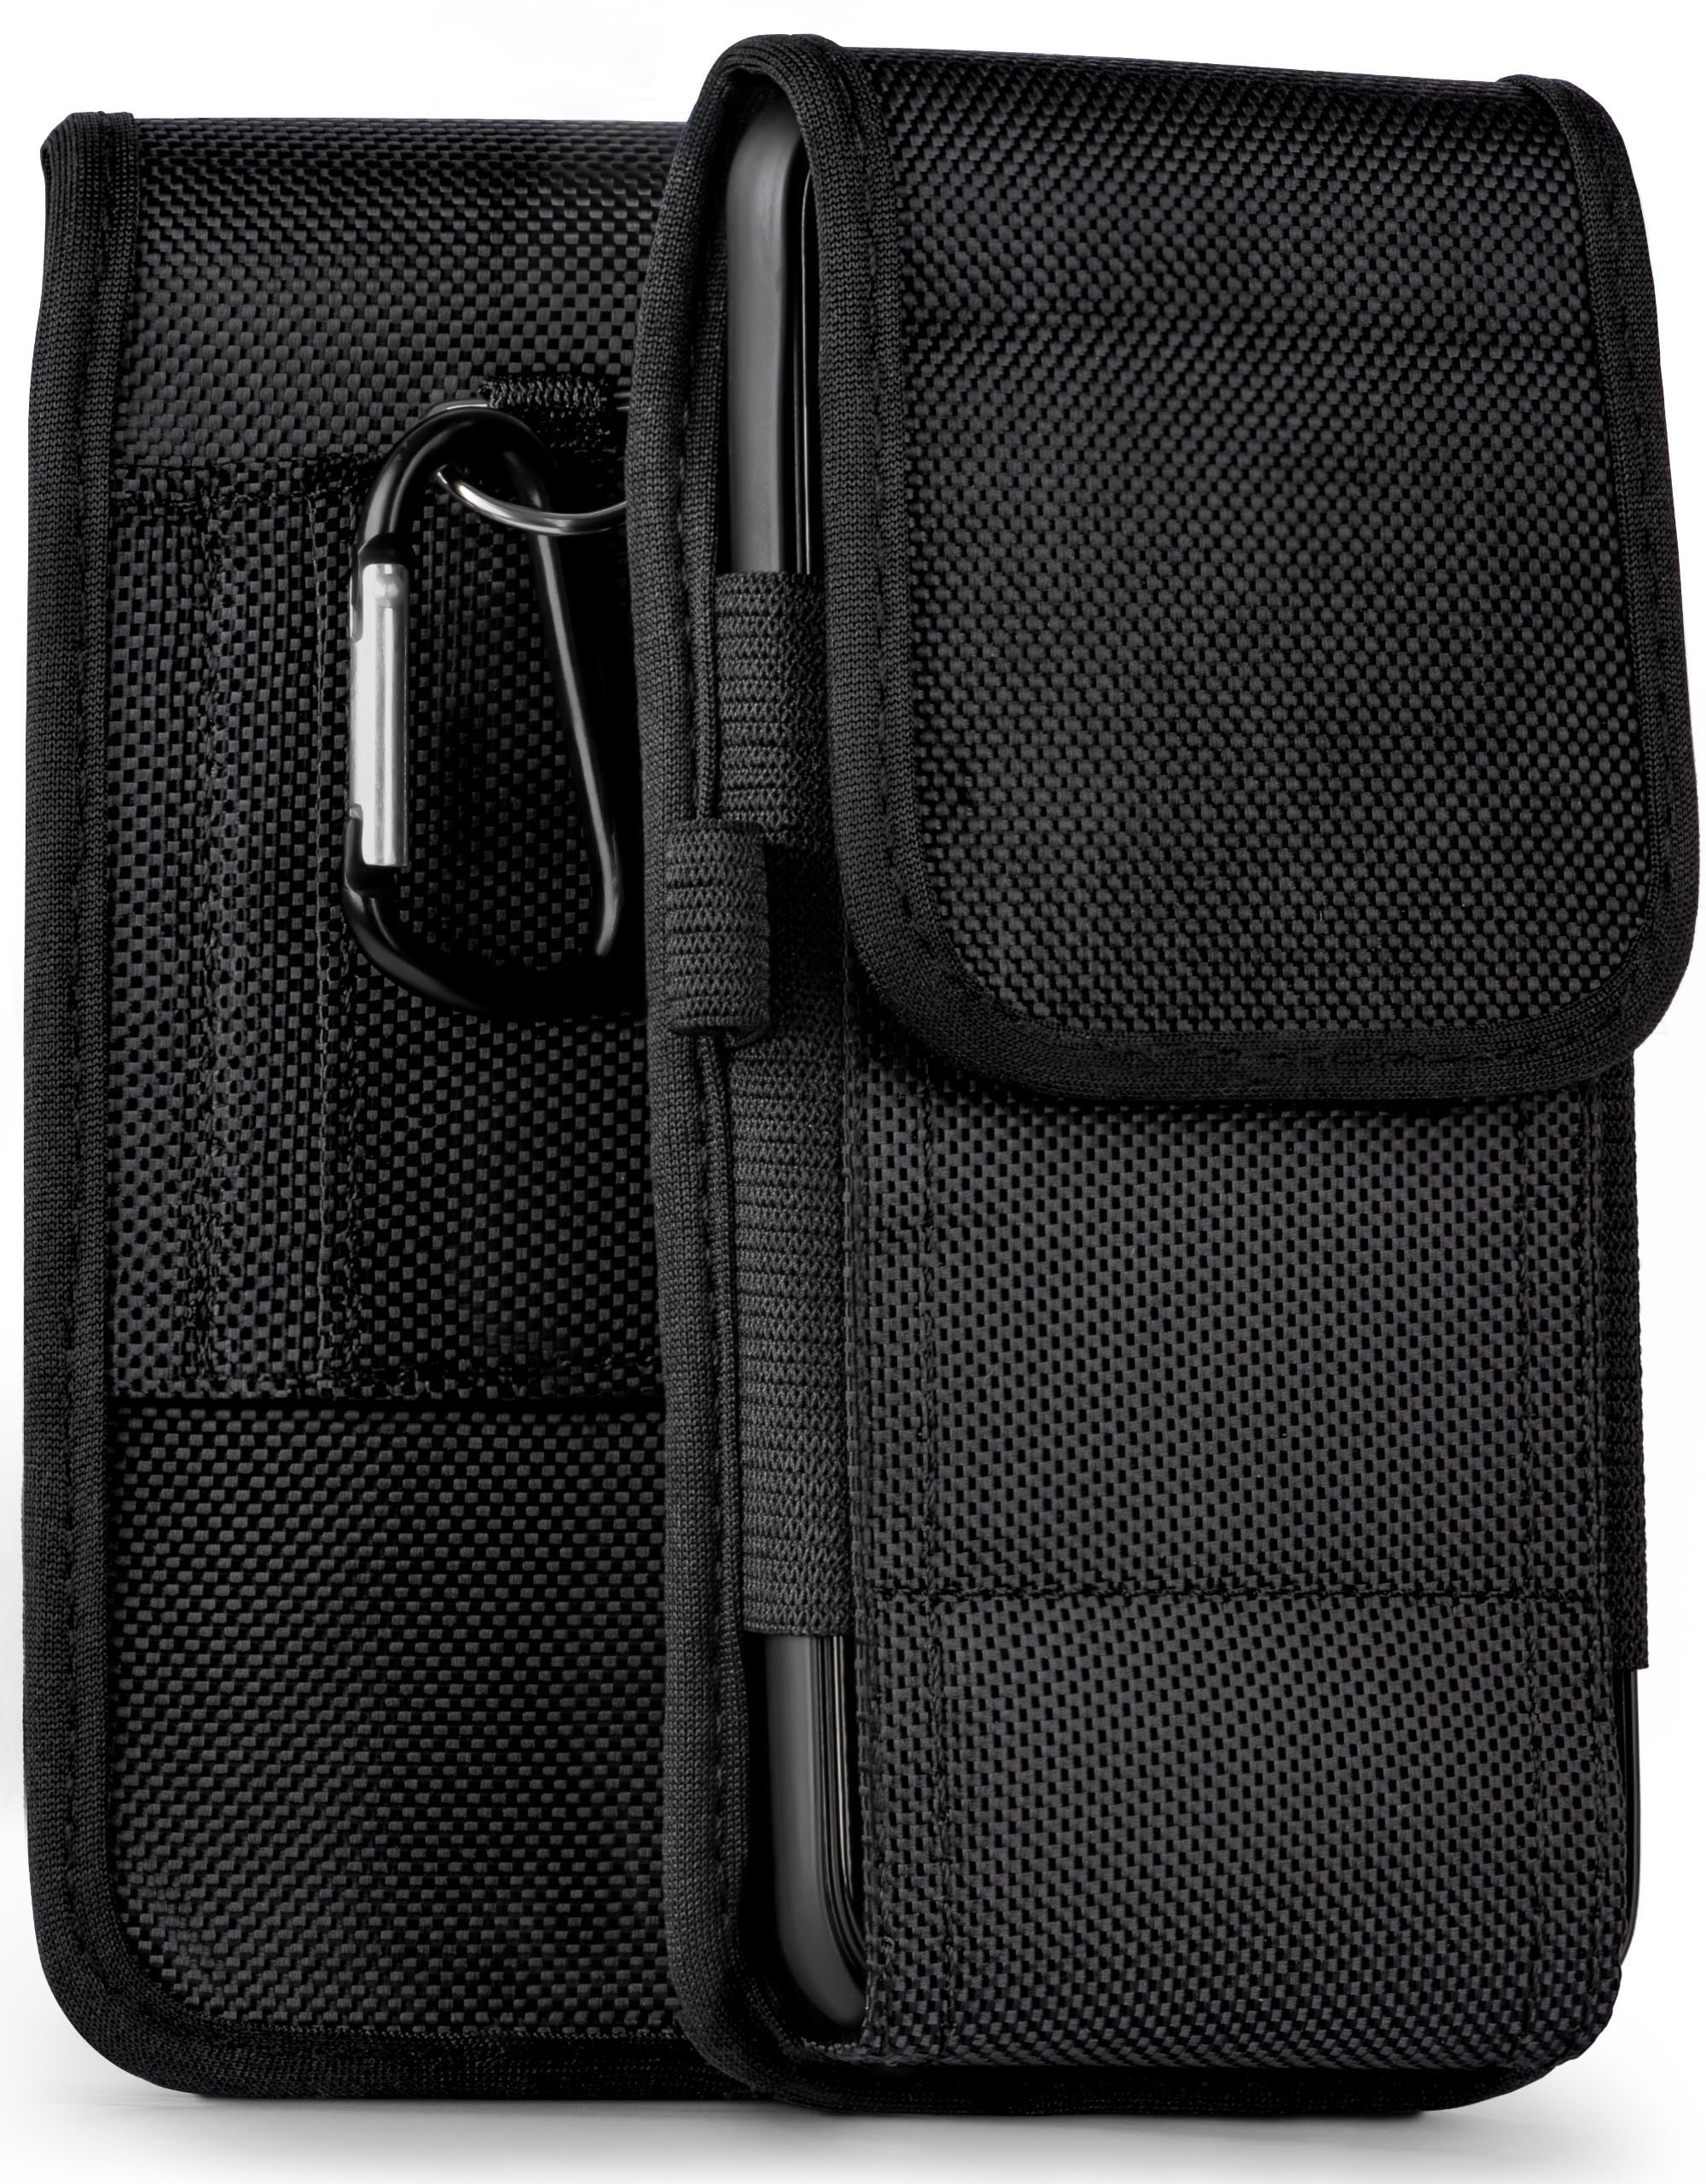 Trail MOEX Huawei, Agility P8, Holster, Case,